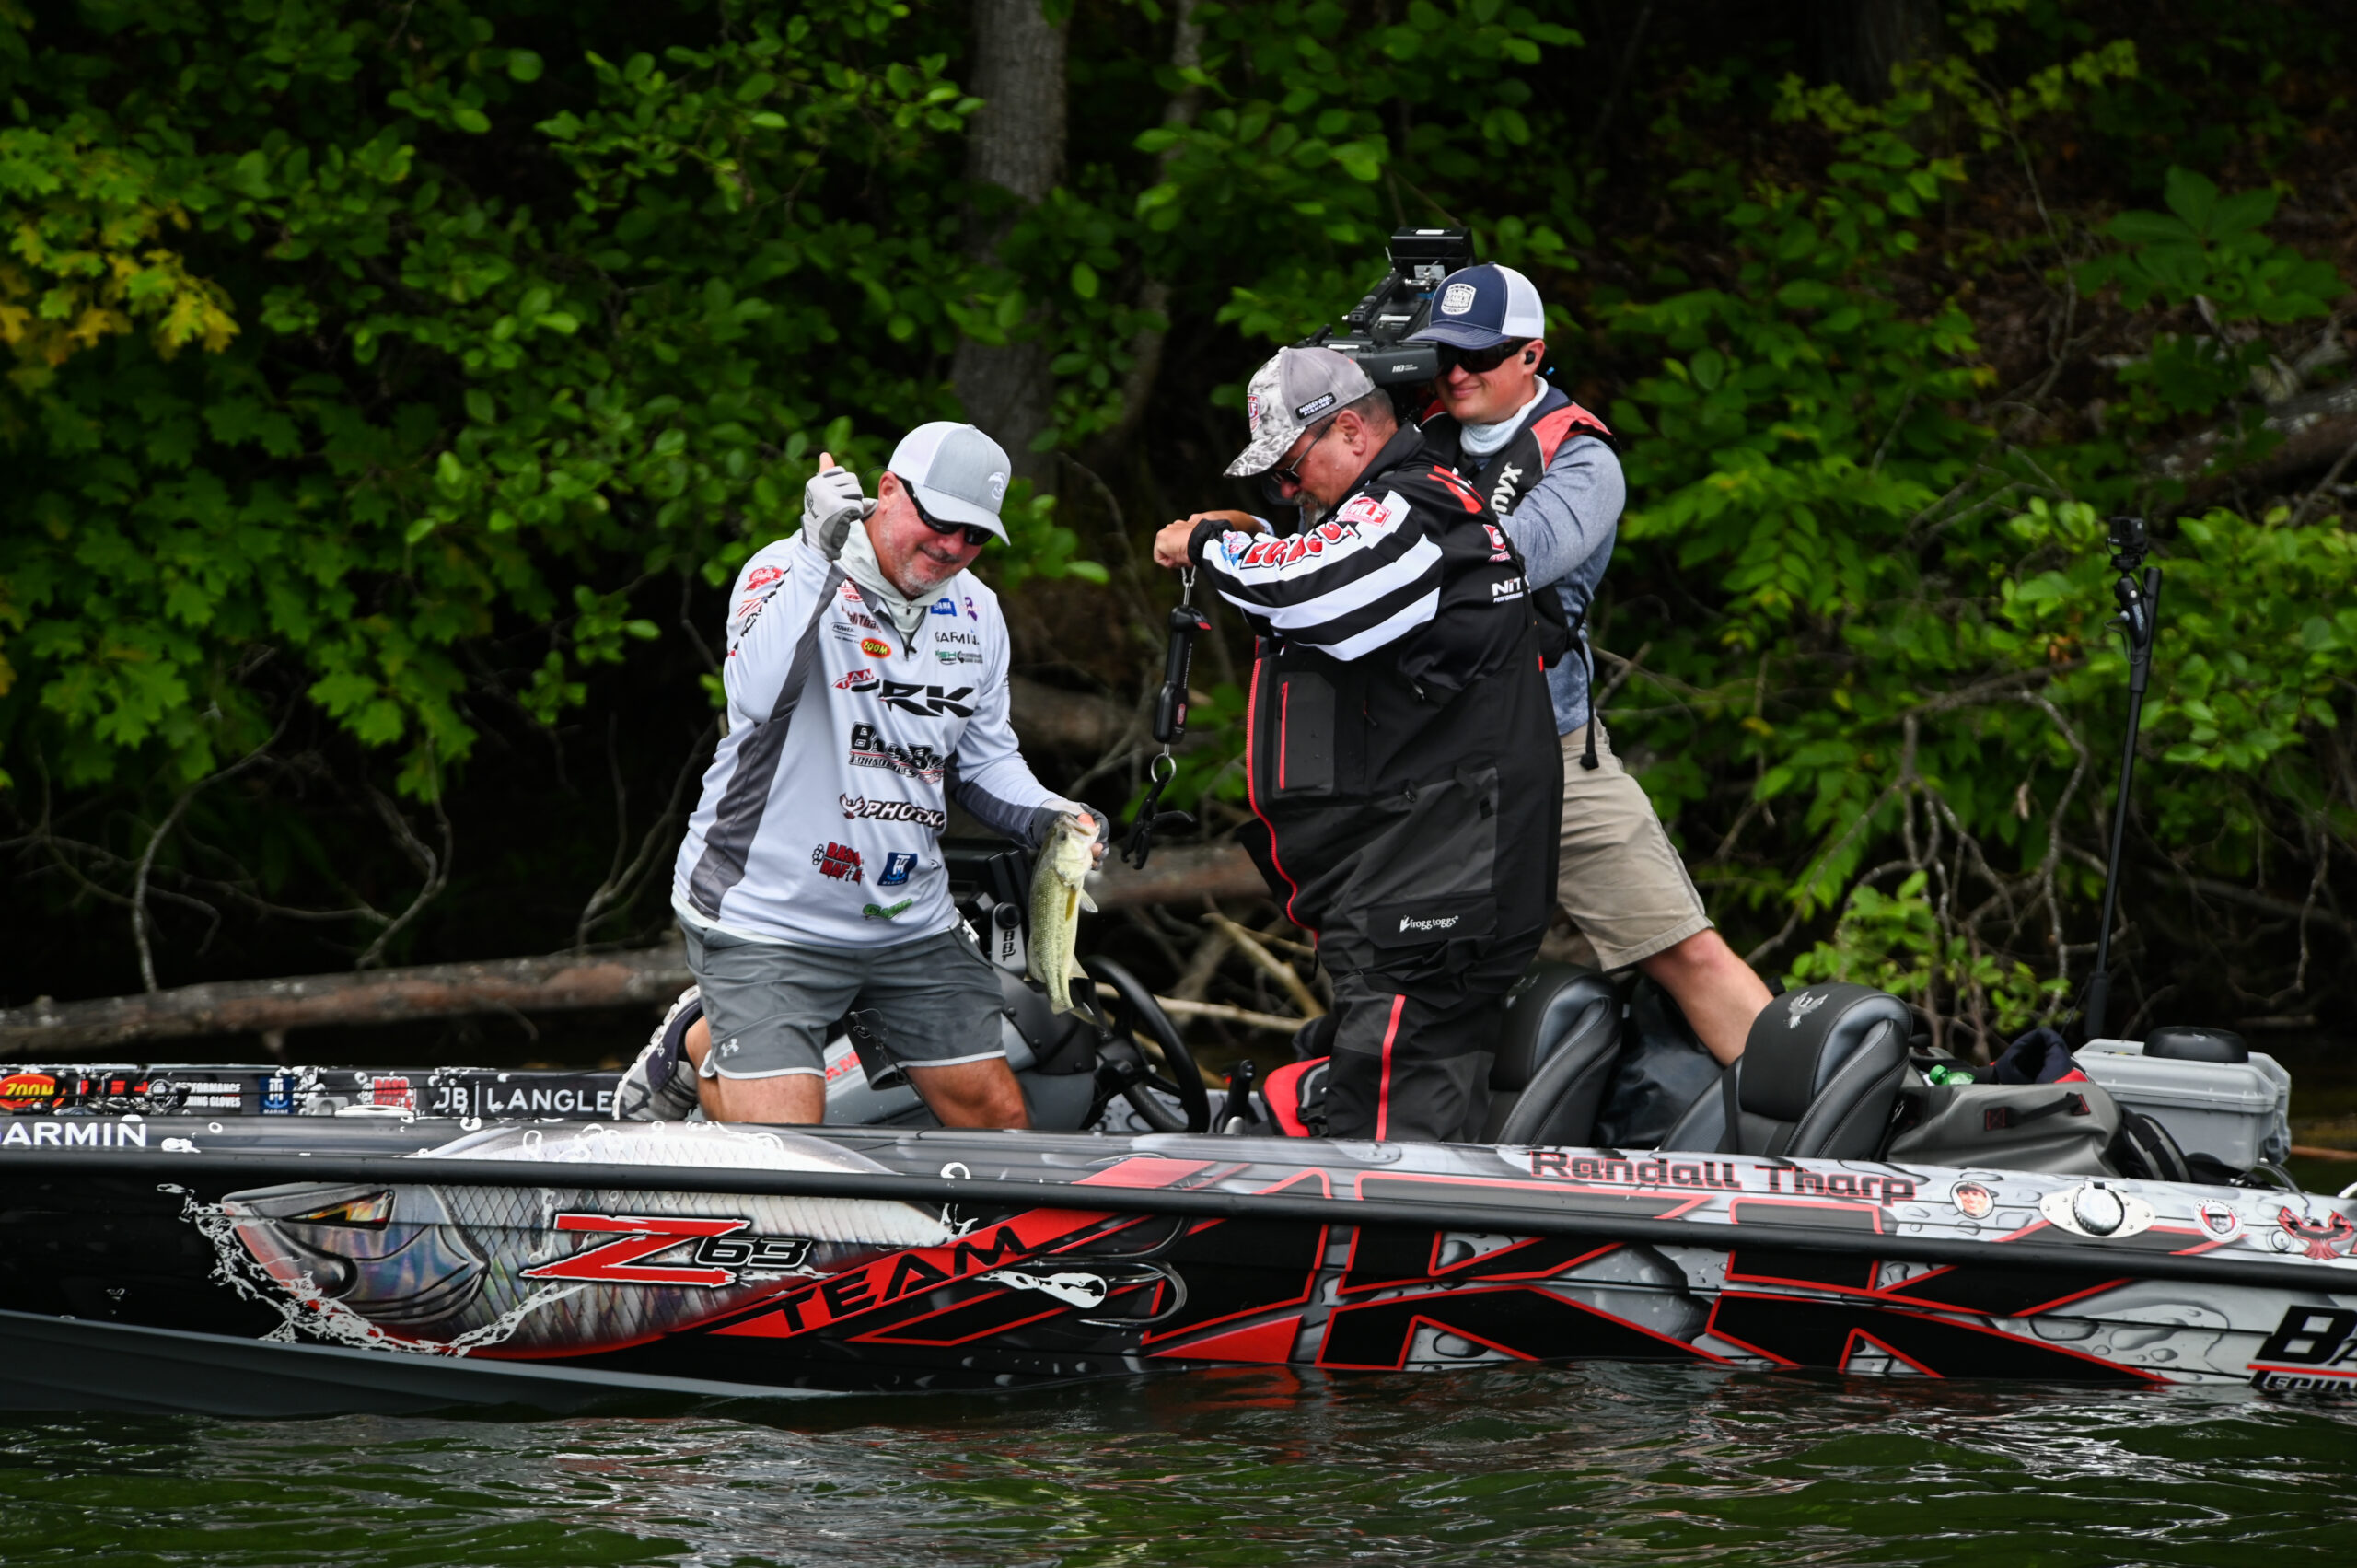 Iaconelli Keeping it Fresh with Kayak, Jon Boat and Fishing with his Kids -  Major League Fishing